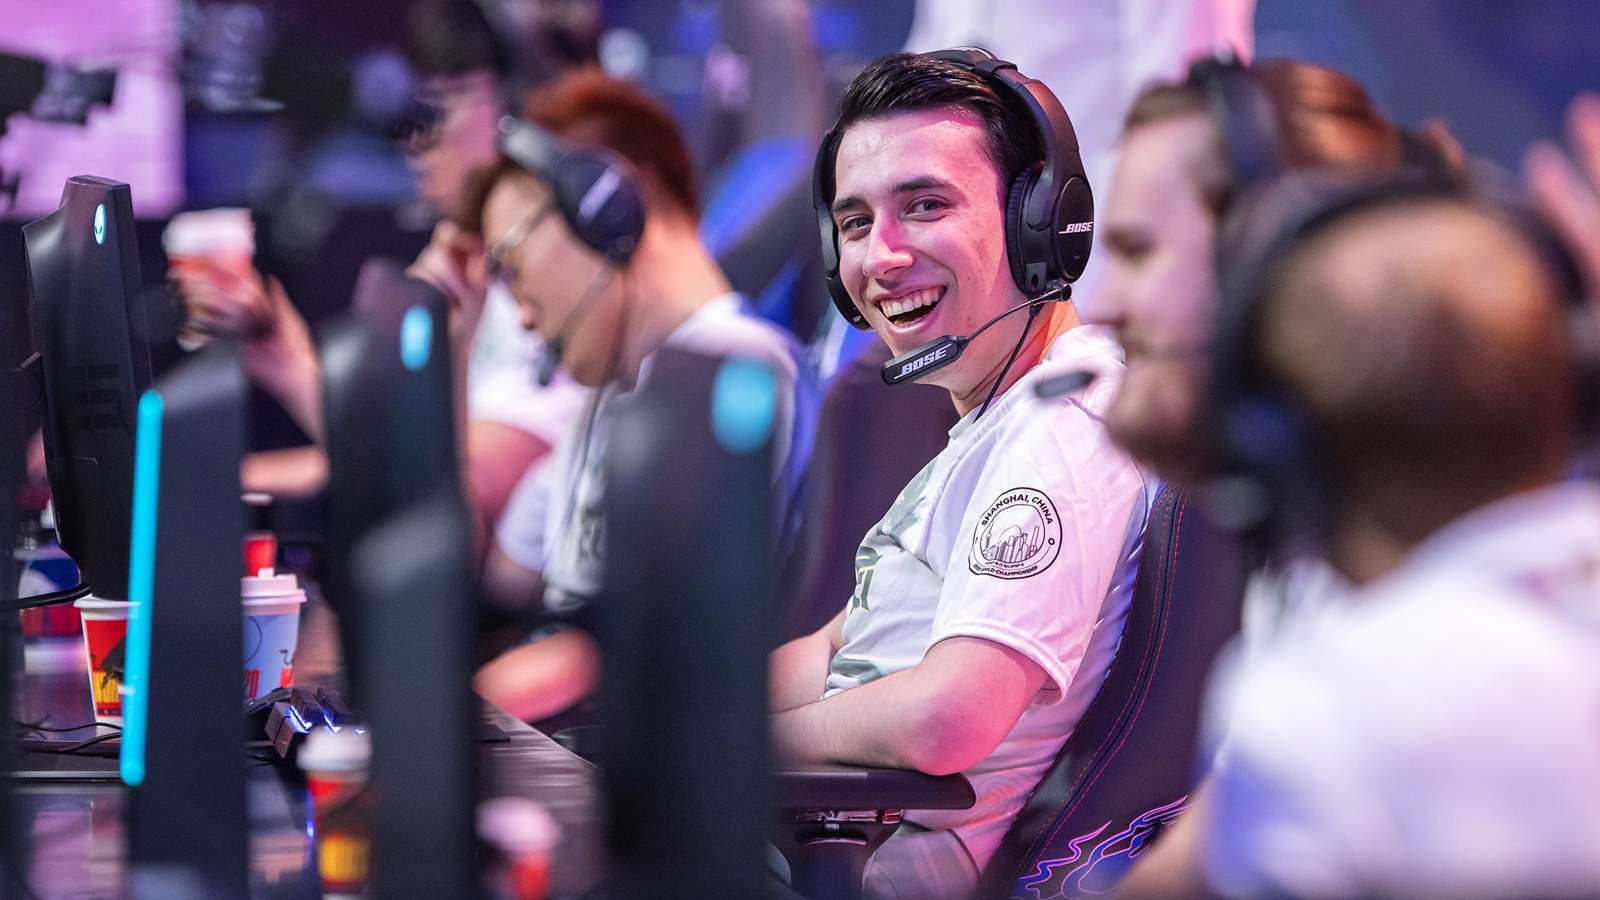 PowerOfEvil smiles playing for FlyQuest at Worlds 2020.